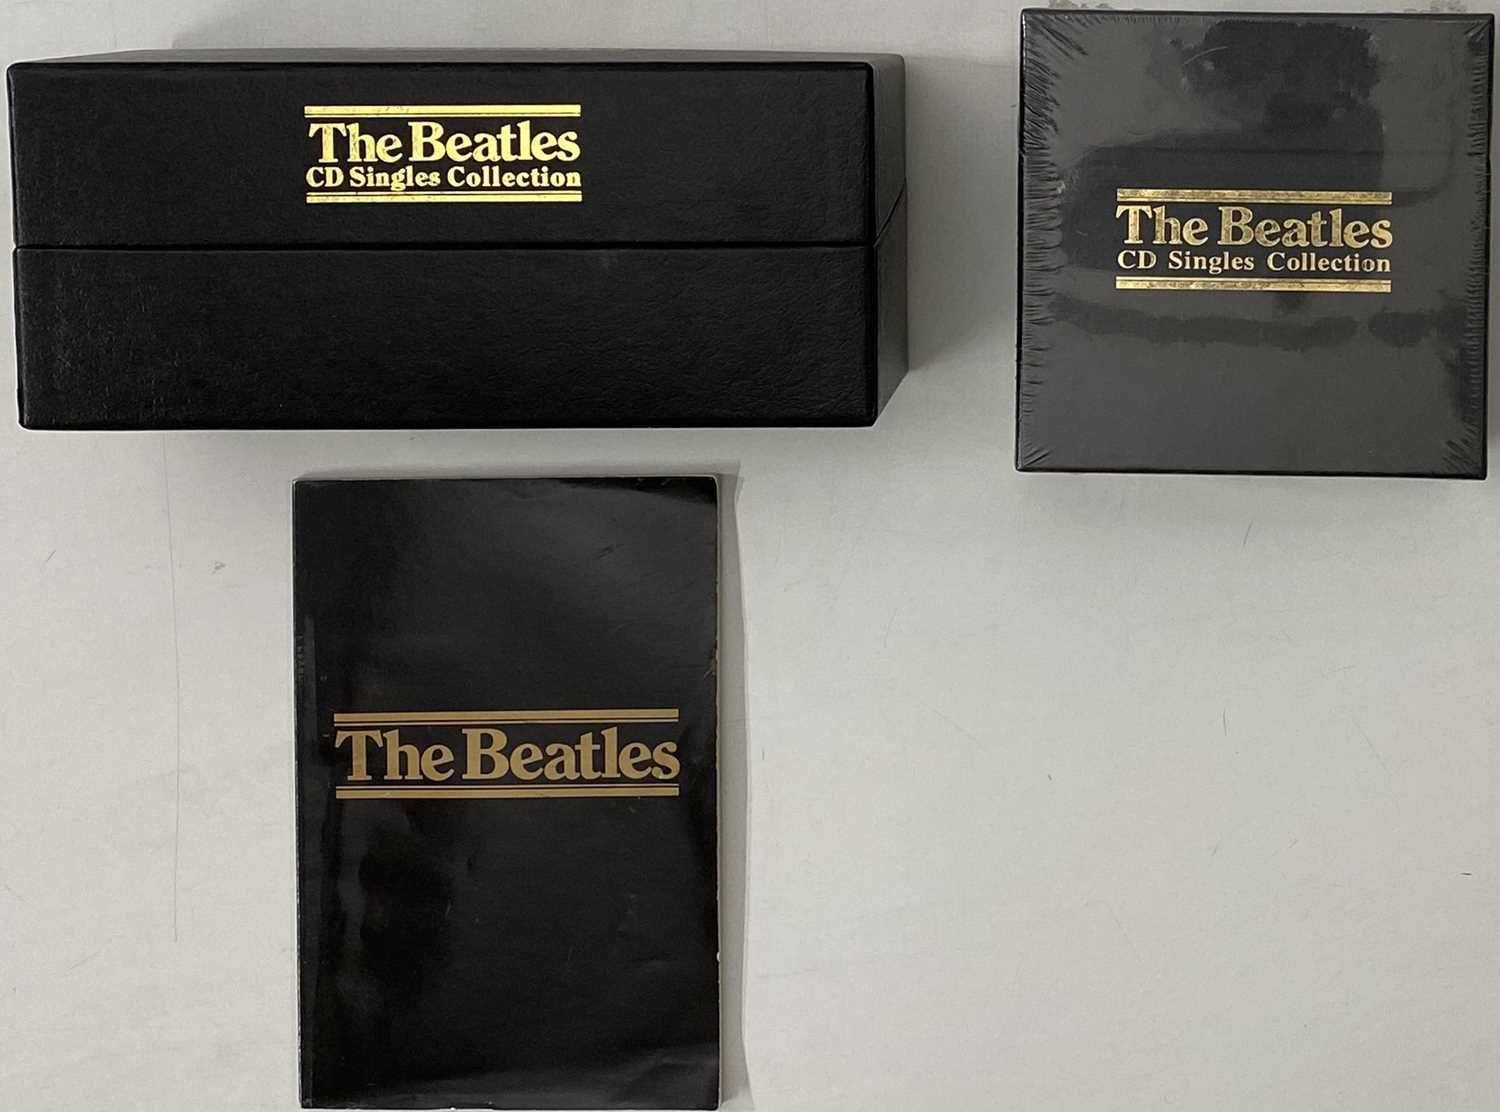 THE BEATLES - CD SINGLES COLLECTION (x2)